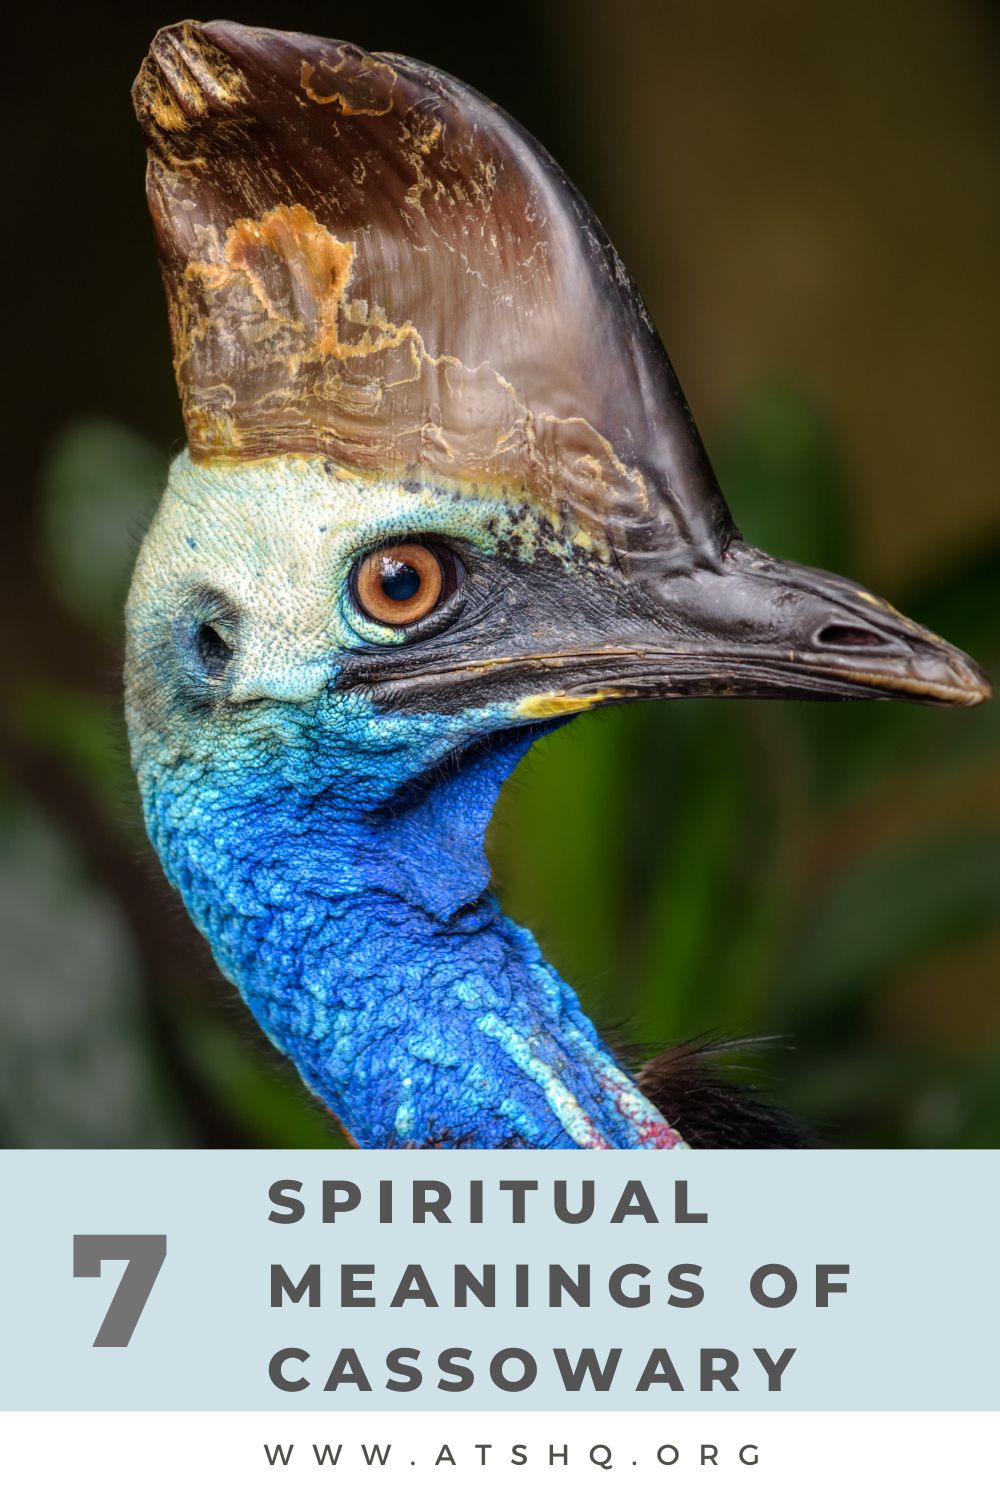 7 Spiritual Meanings of Cassowary